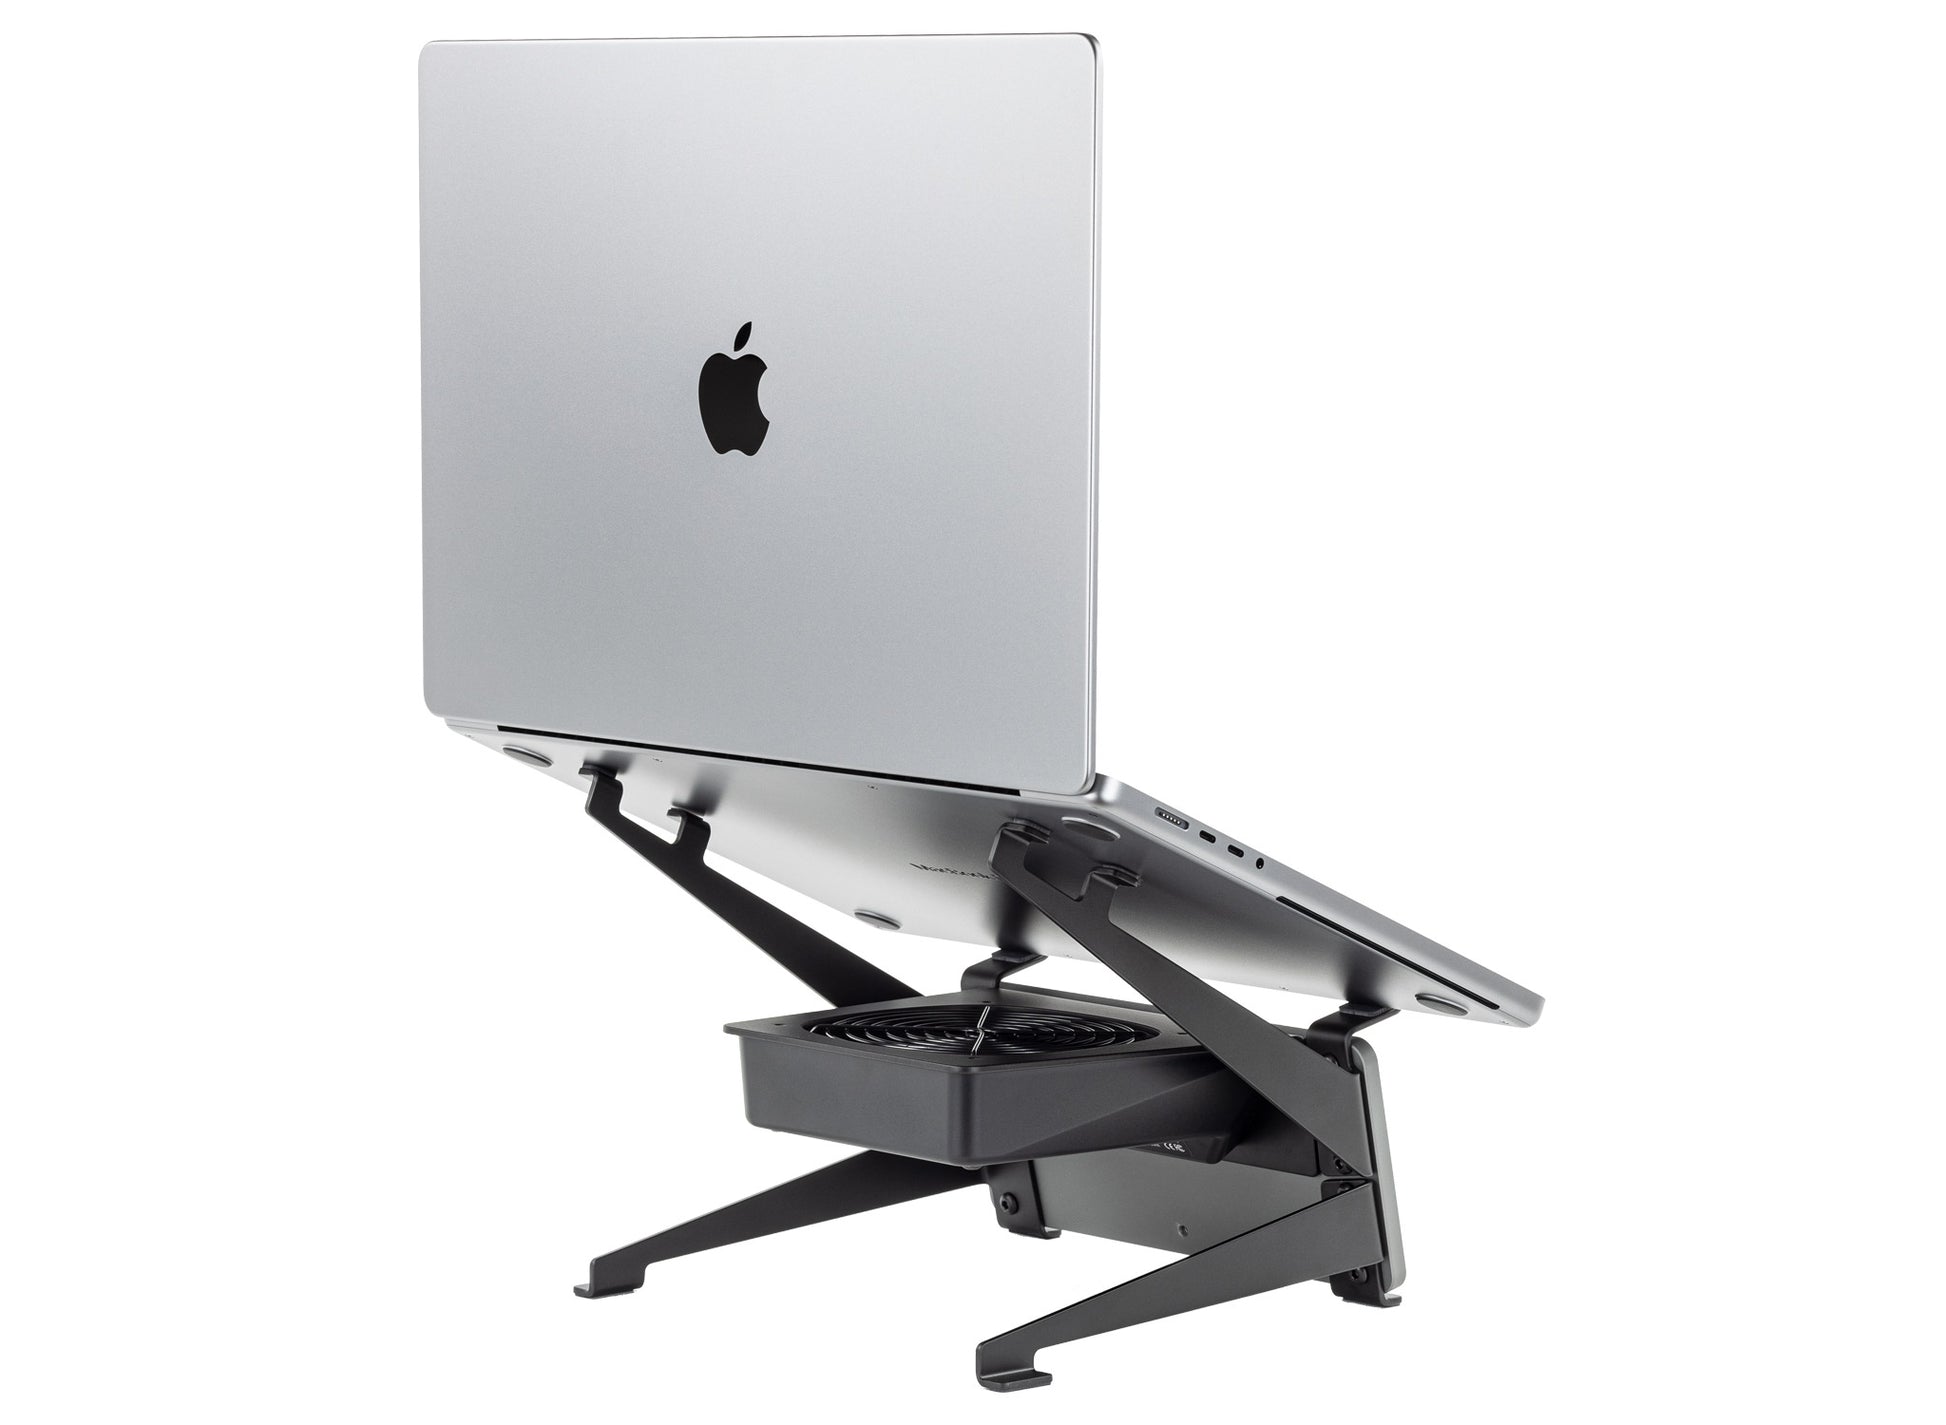 SVALT Cooling Stand model SRxB14 gray back side view for quiet fan cooling performance with Apple laptop 2021 M1 Max 16-inch MacBook Pro